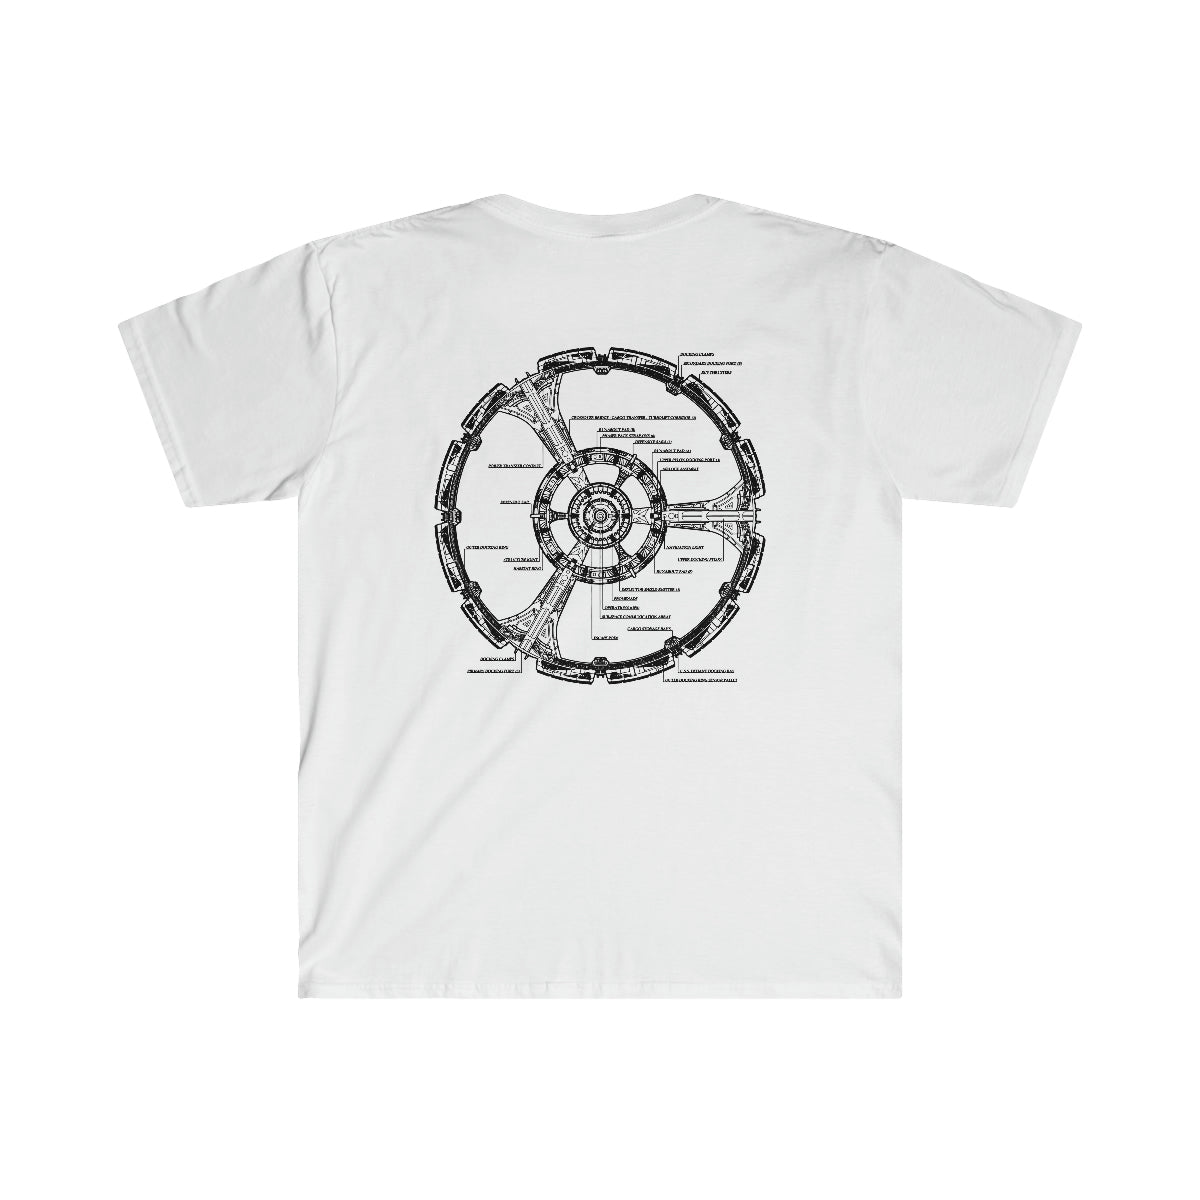 A Limited Edition Space Station T-Shirt with a graphic design of a wheel.